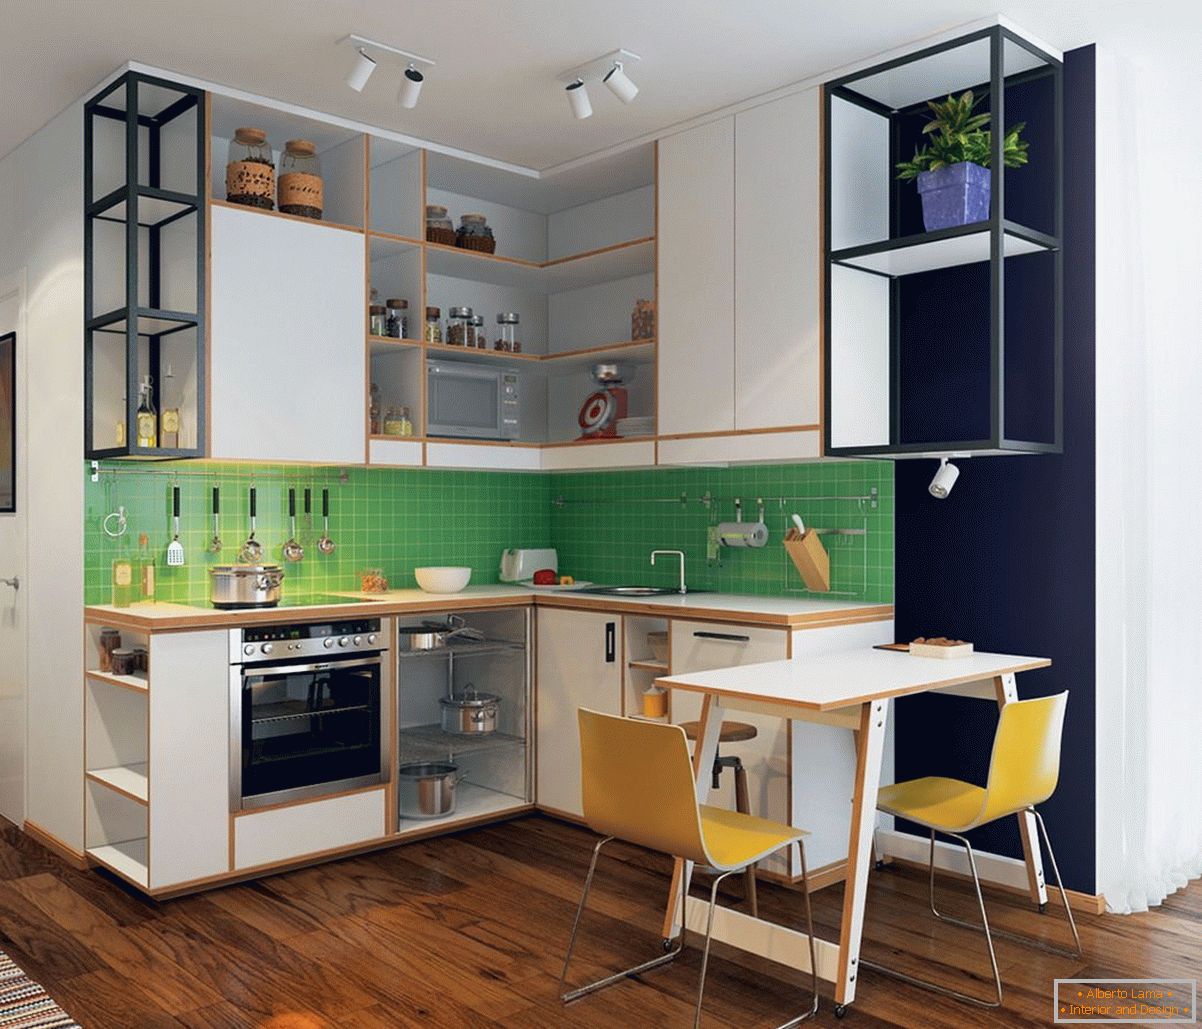 The combination of white furniture and a green apron